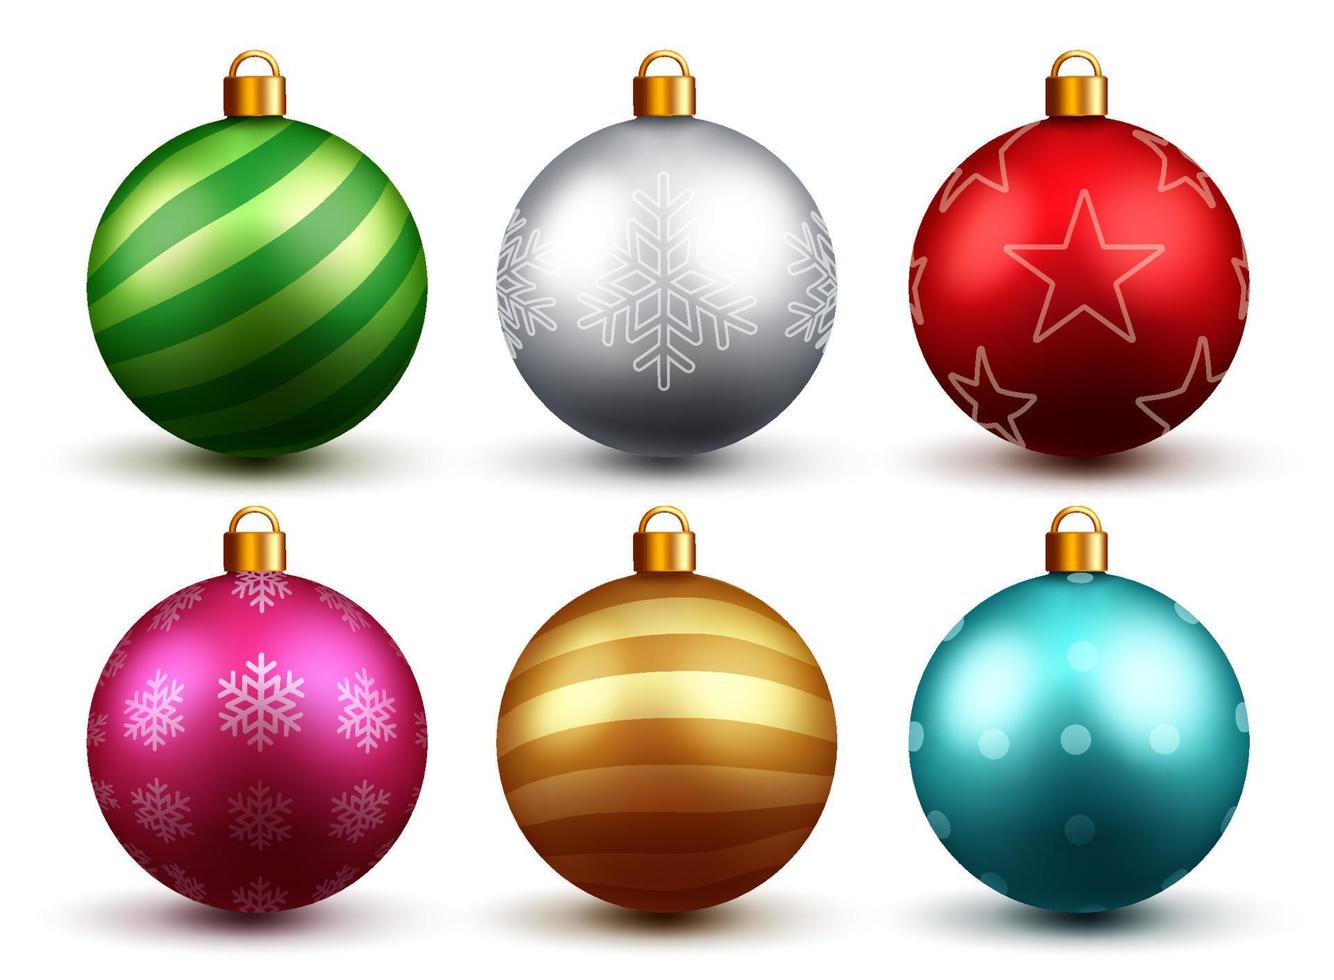 Christmas balls vector set design. Colorful 3d realistic christmas ball with xmas print and patterns isolated in white background for holiday ornament decoration. Vector illustration.